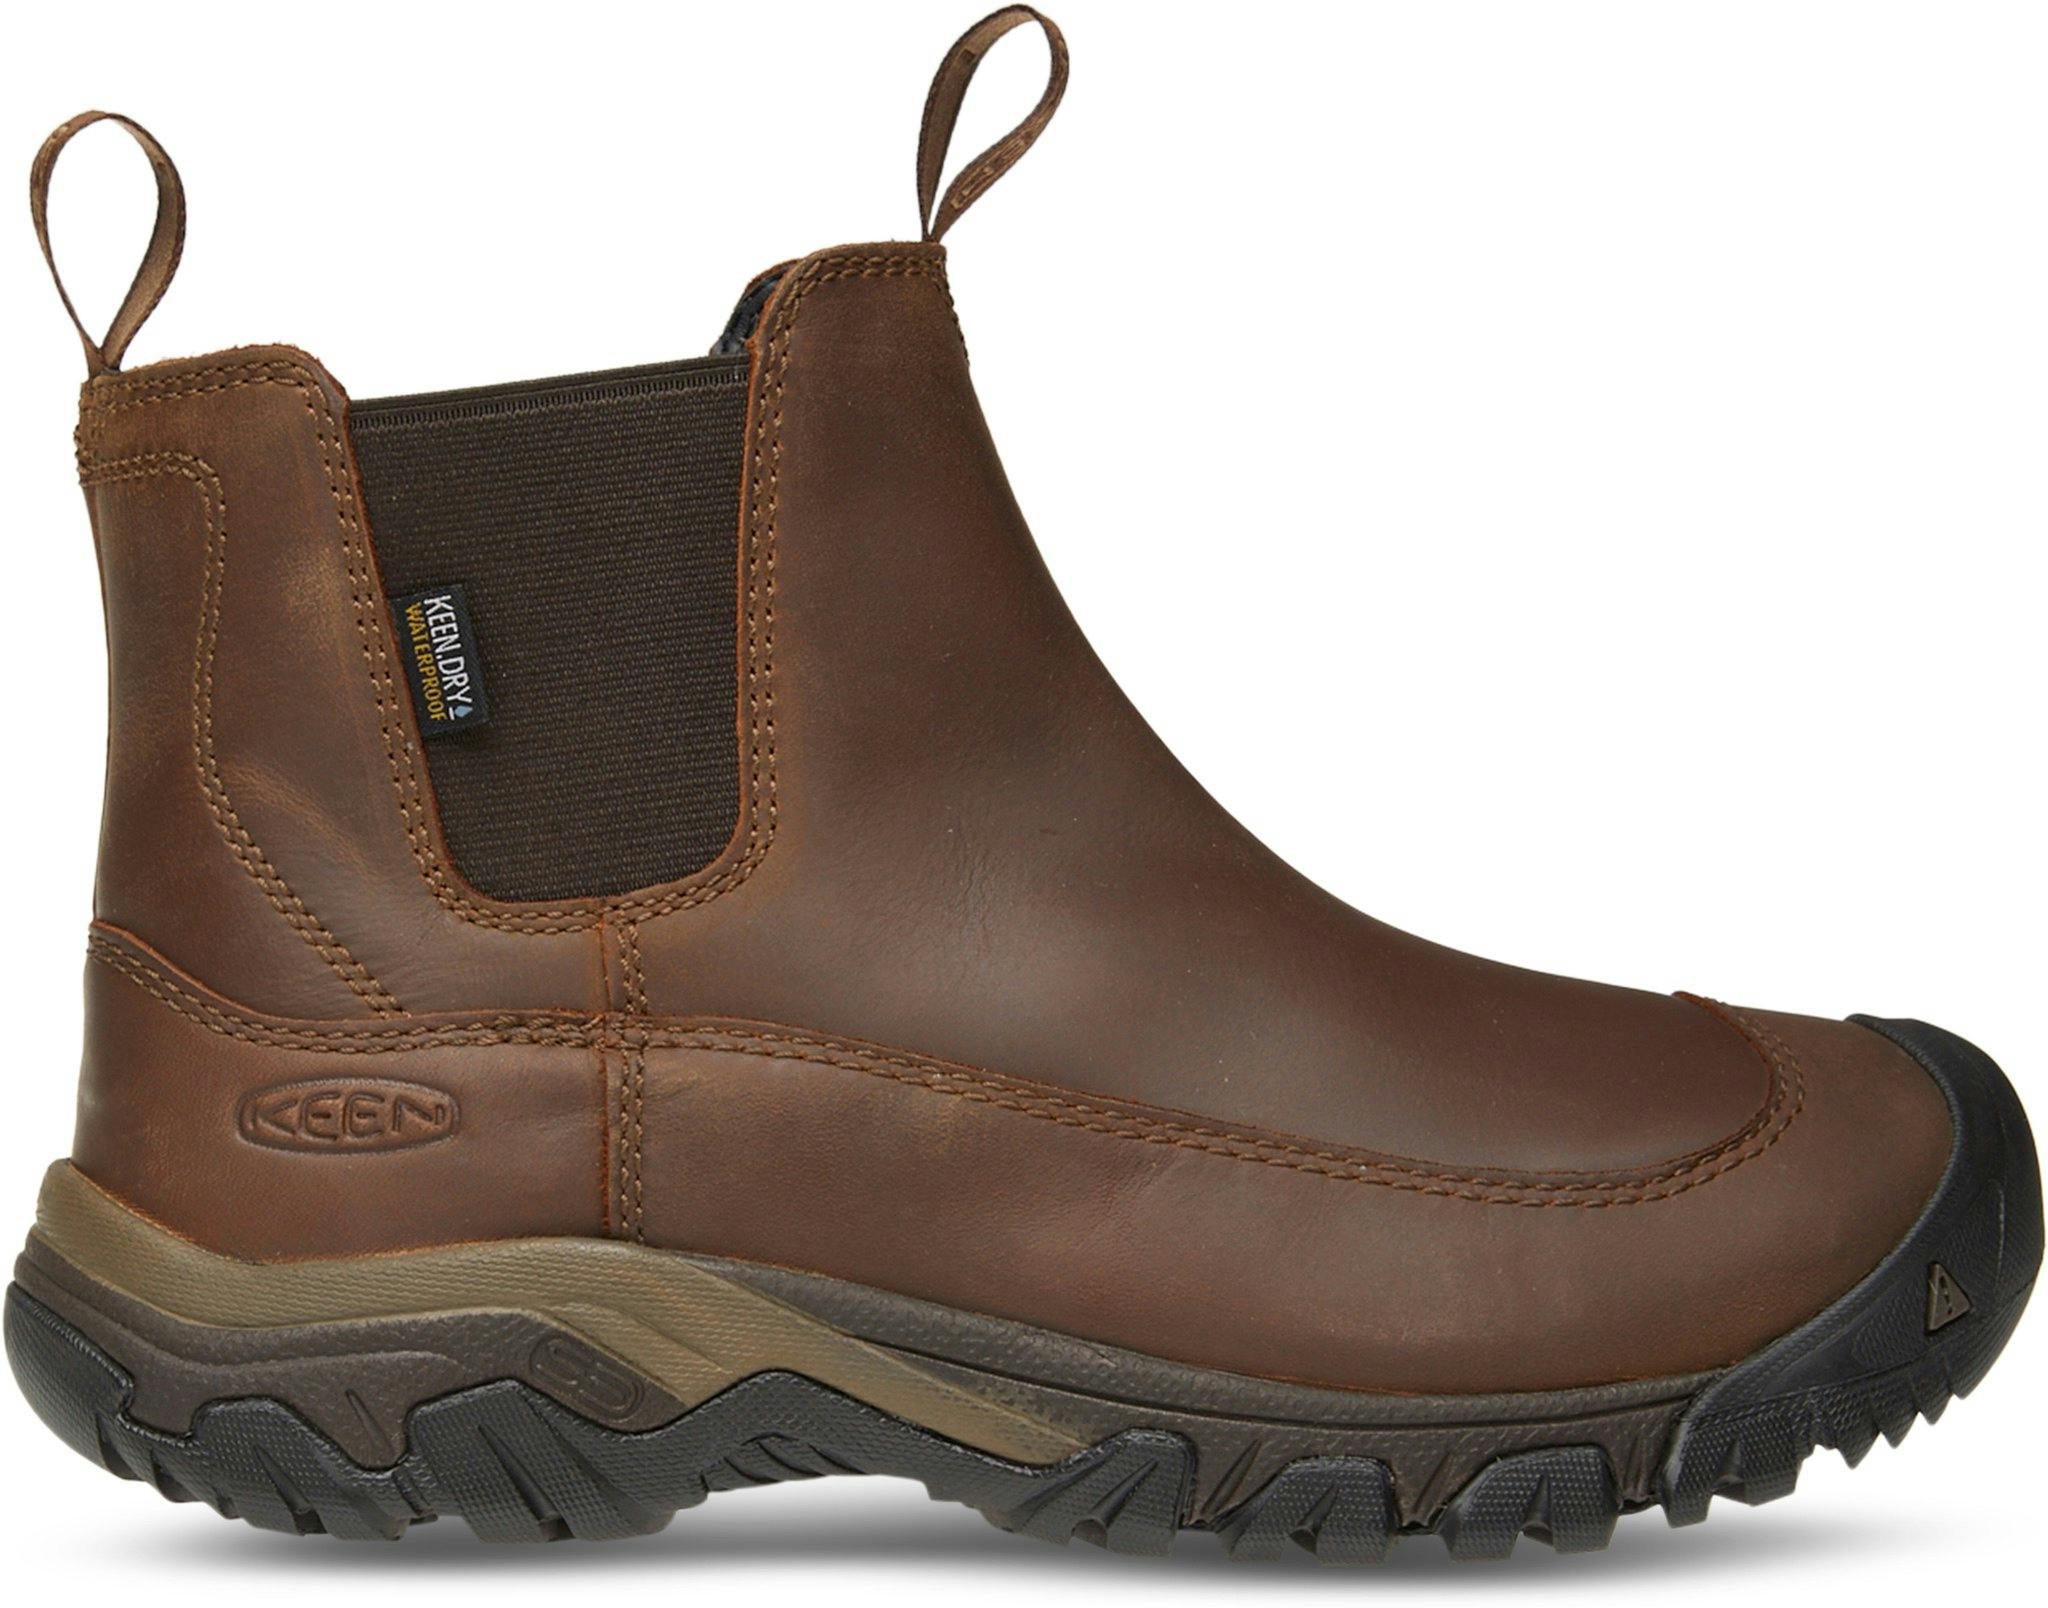 Product image for Anchorage III Wp Insulated Boots - Men's